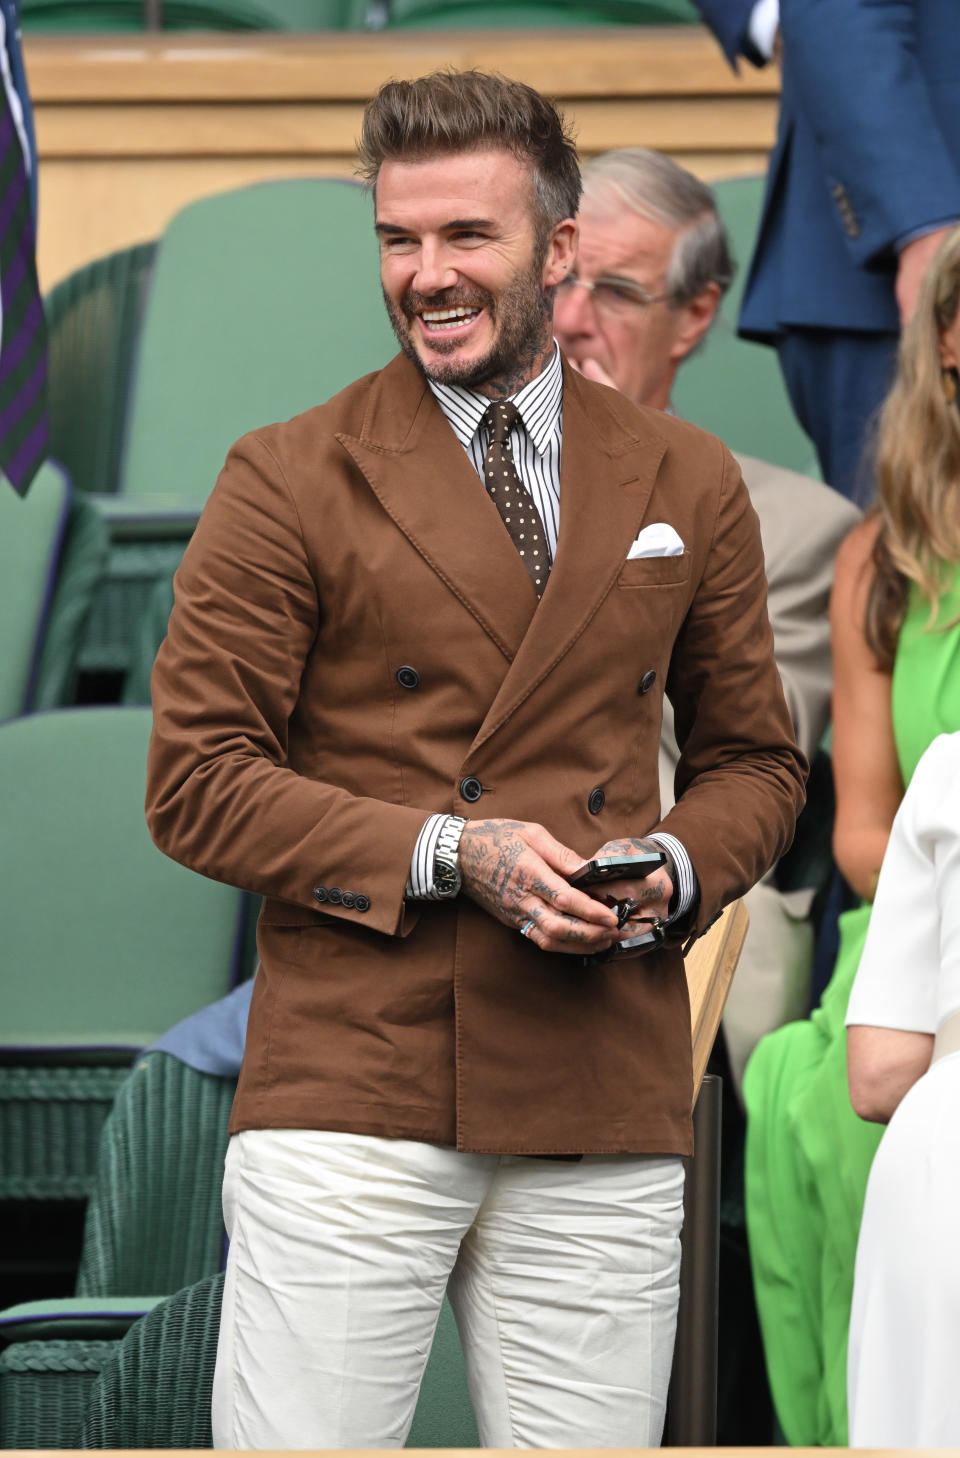 LONDON, ENGLAND - JULY 06: David Beckham attends day 10 of the Wimbledon Tennis Championships at All England Lawn Tennis and Croquet Club on July 06, 2022 in London, England. (Photo by Karwai Tang/WireImage)